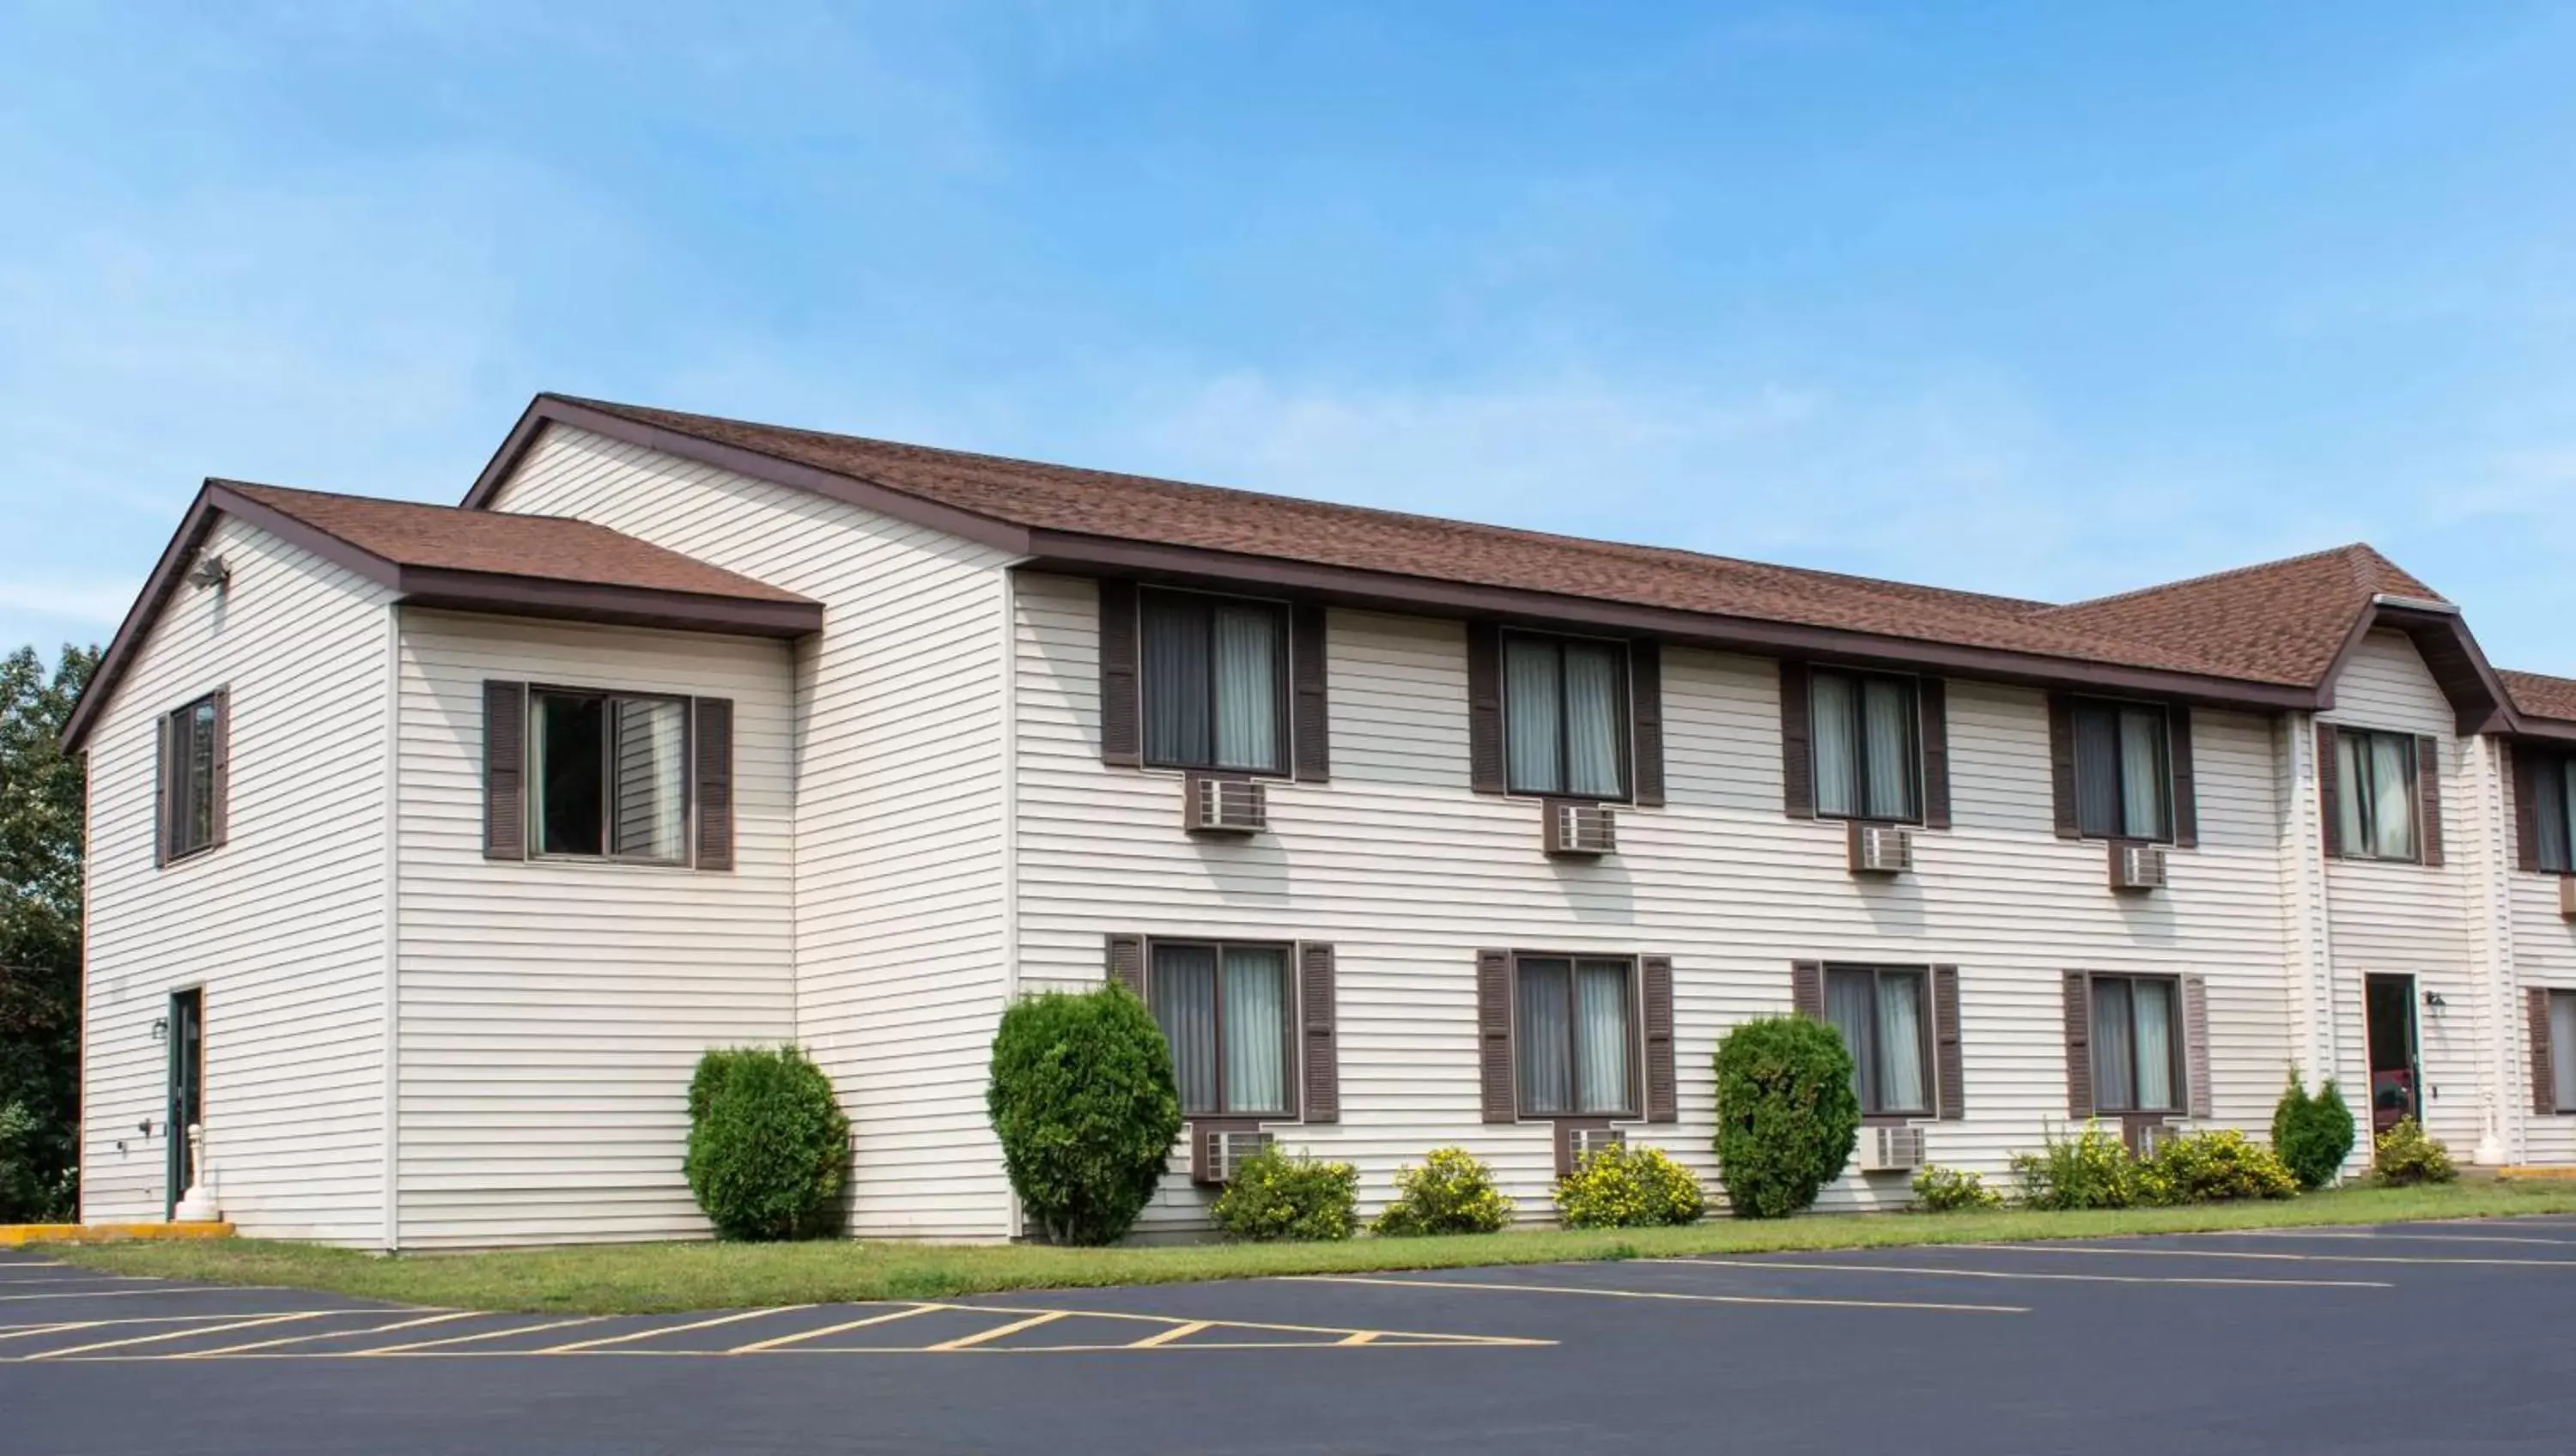 Property Building in Magnuson Hotel Country Inn